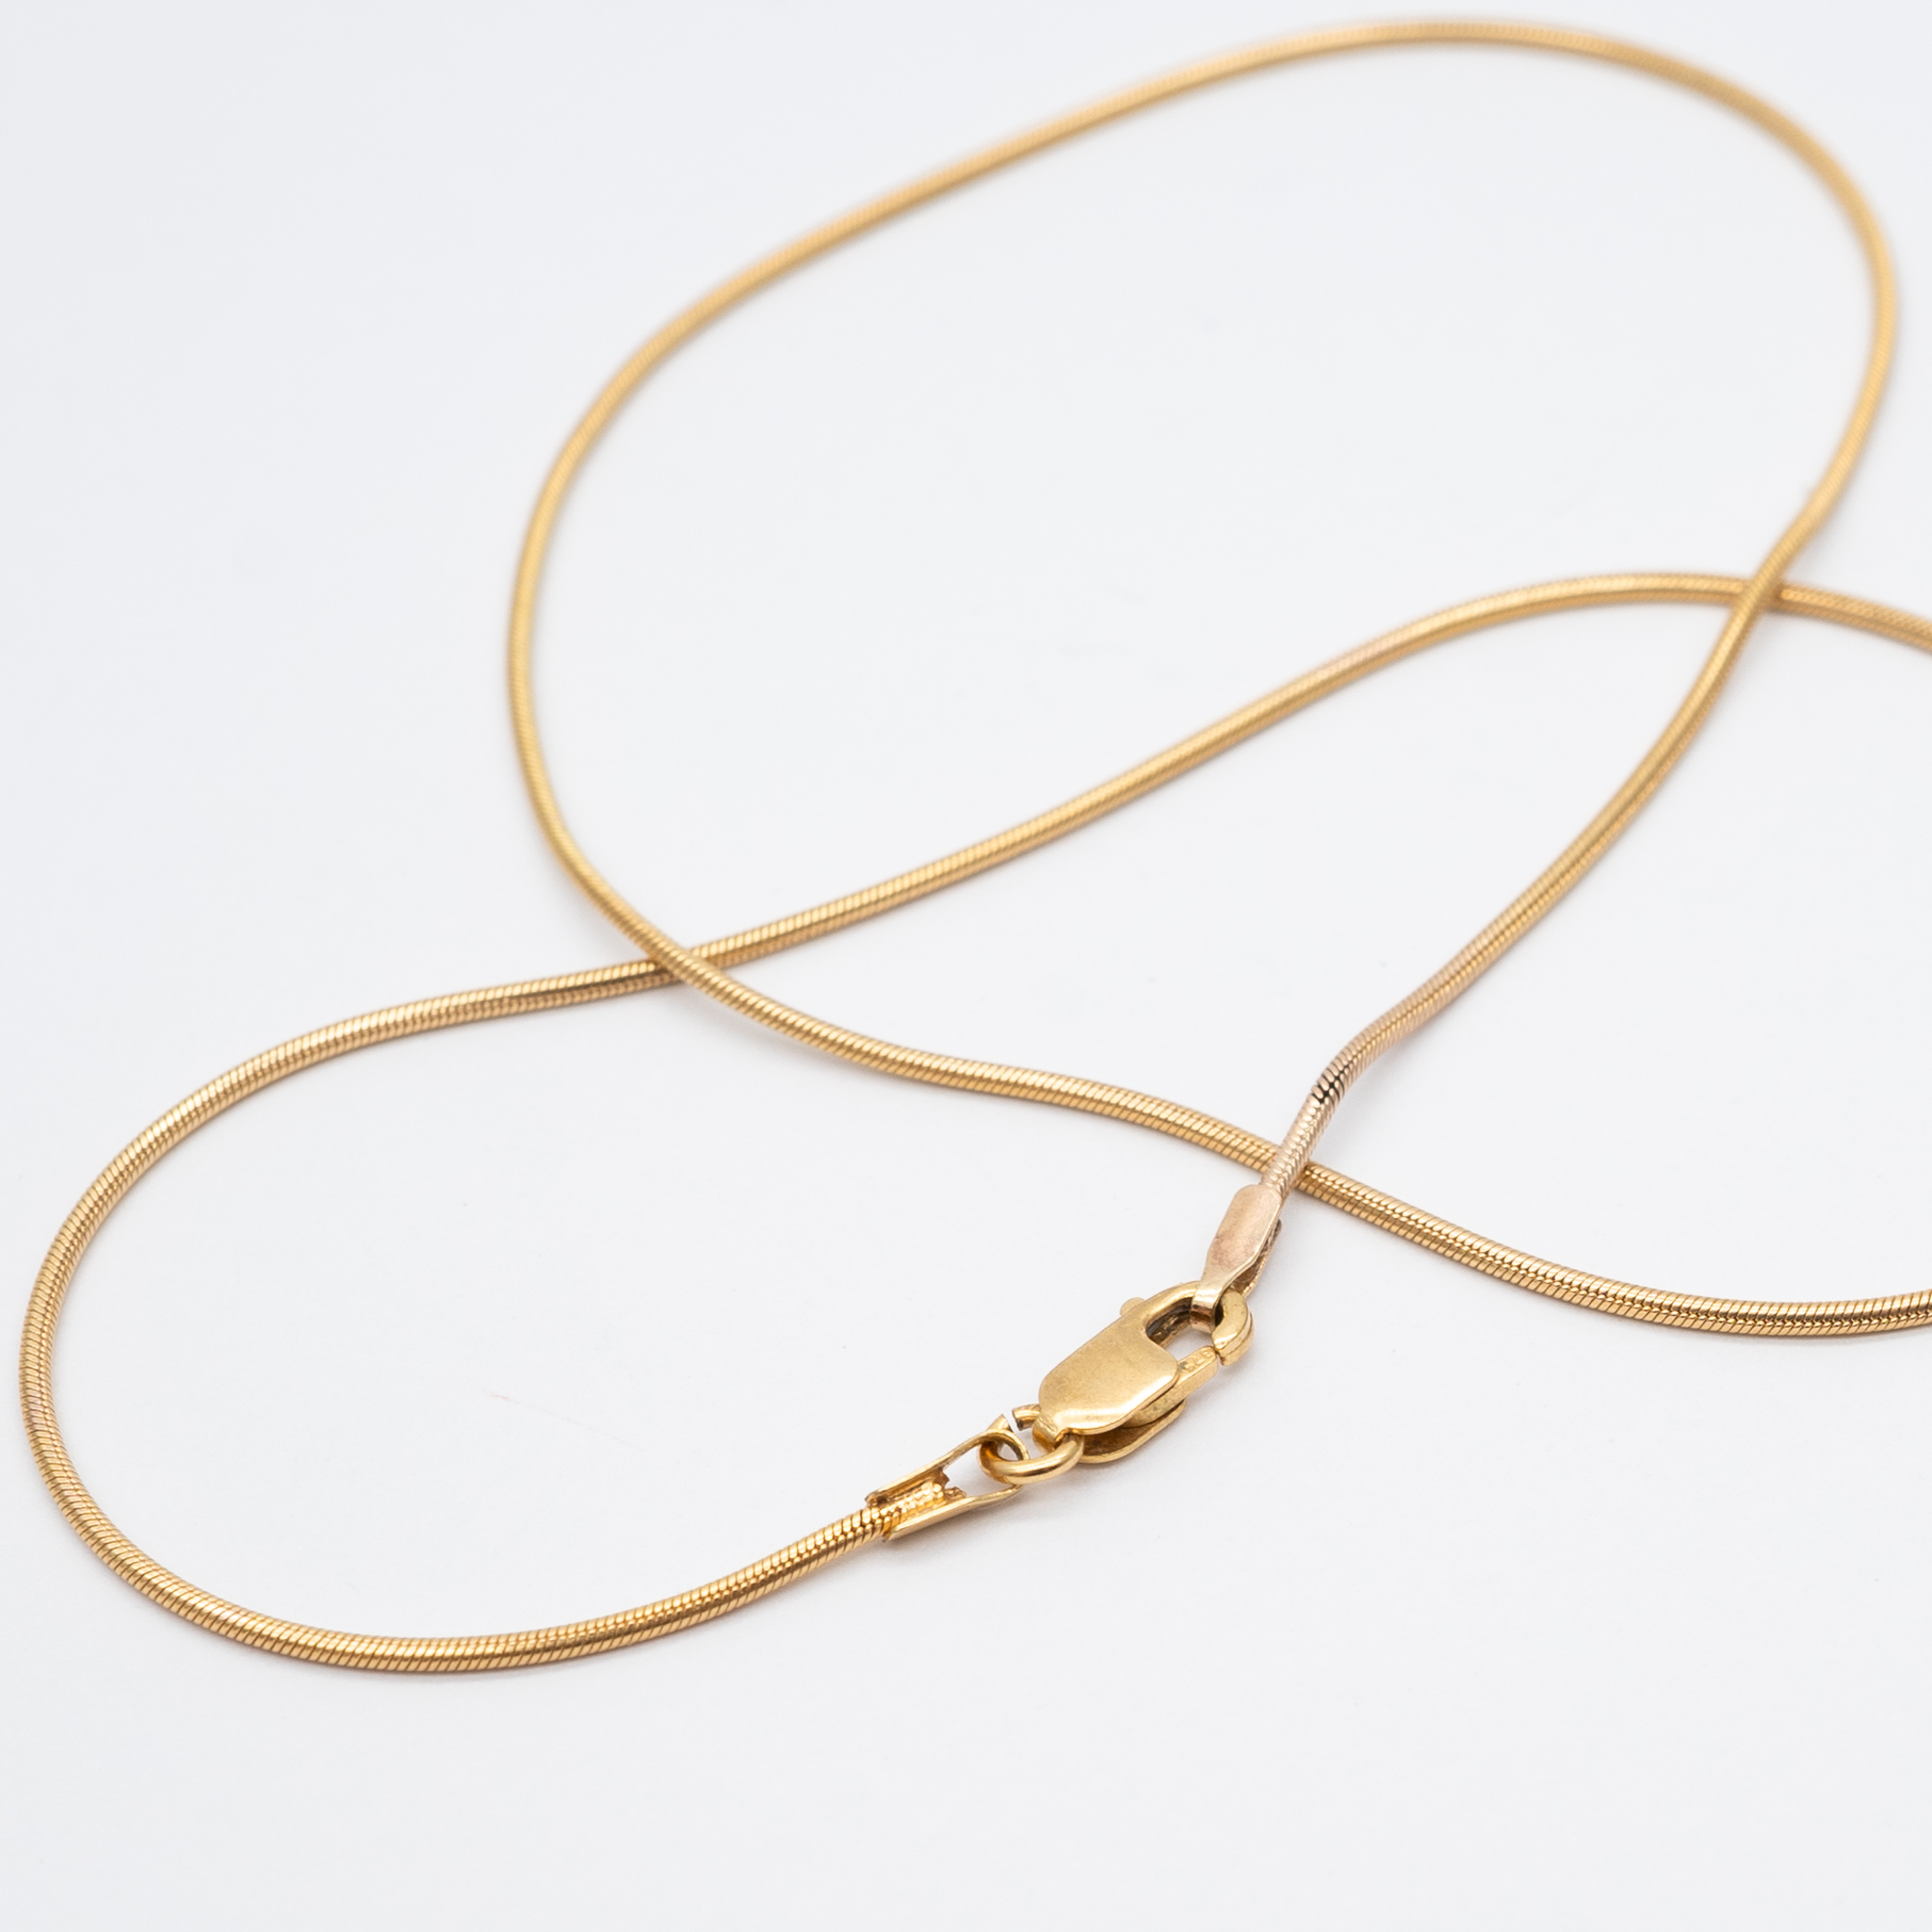 A 9ct yellow gold snake chain - Image 2 of 3